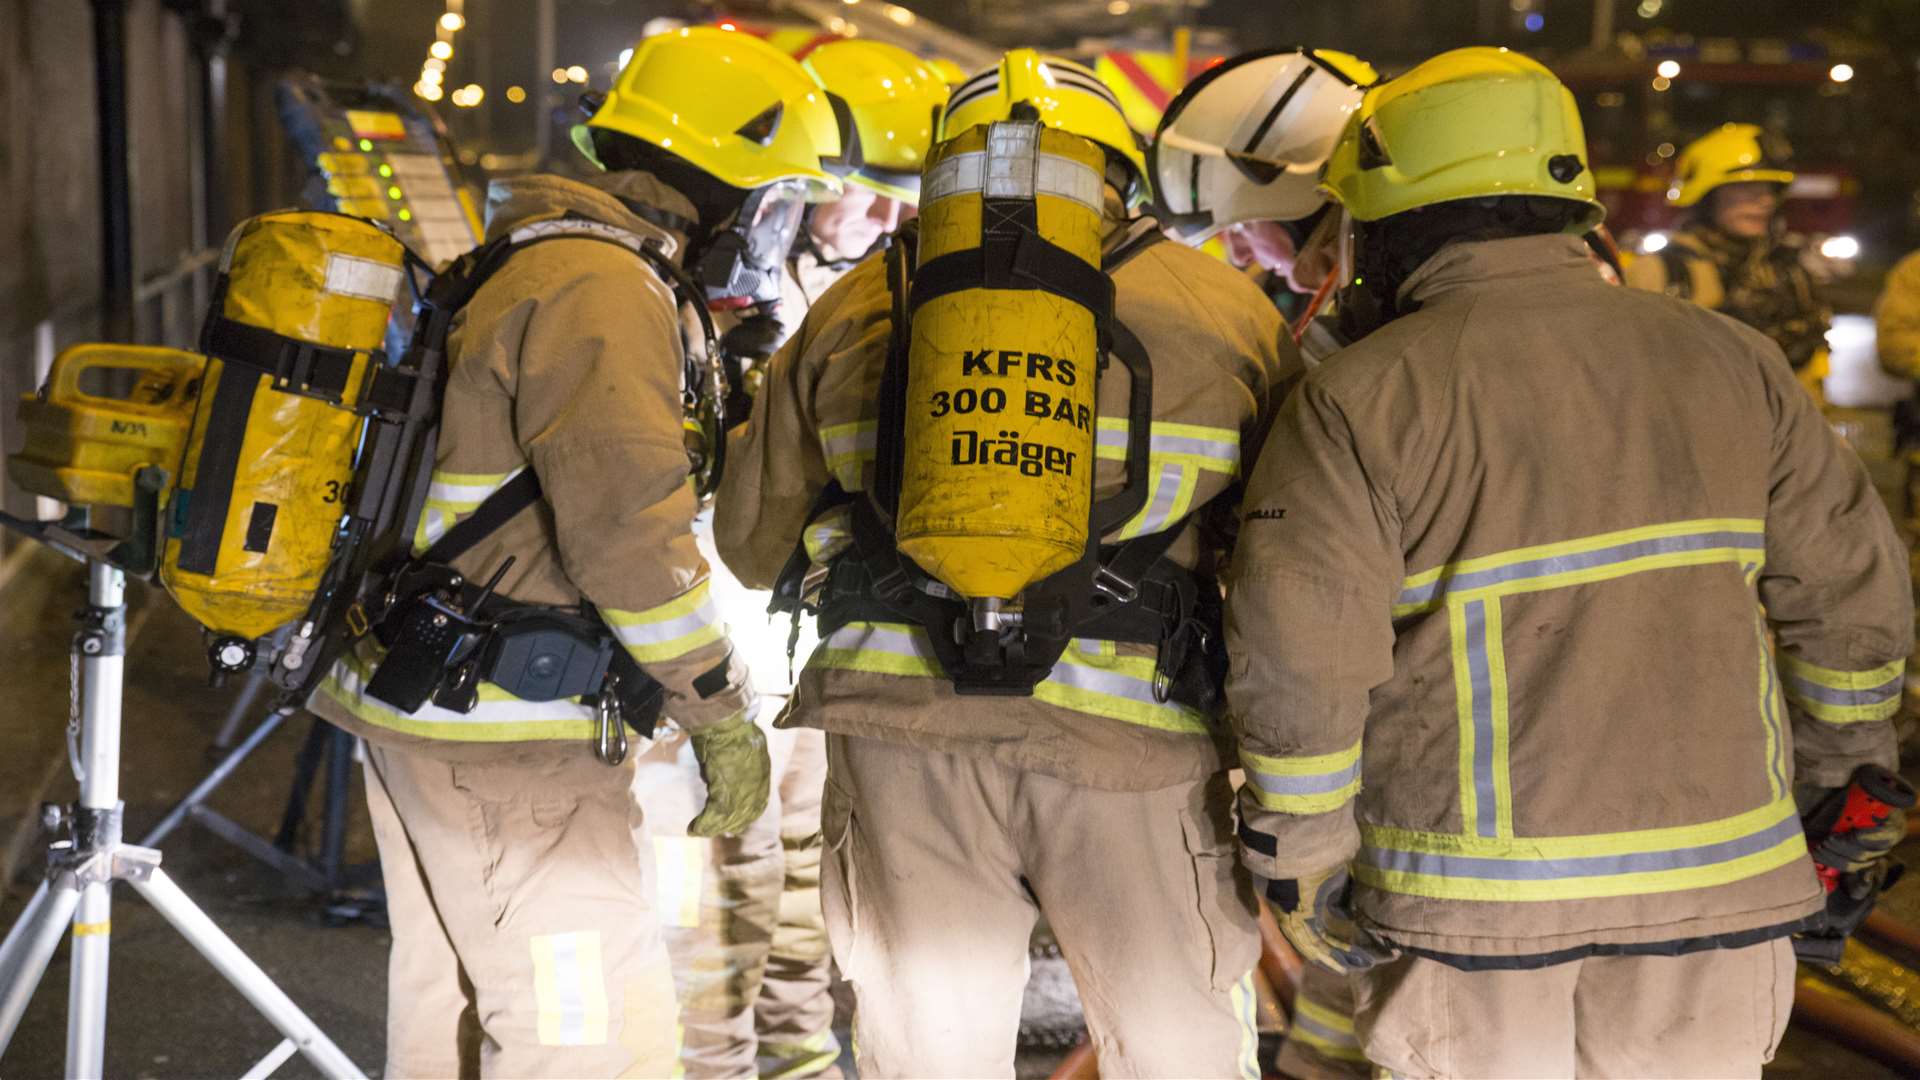 Stock pic: Kent Fire and Rescue Service